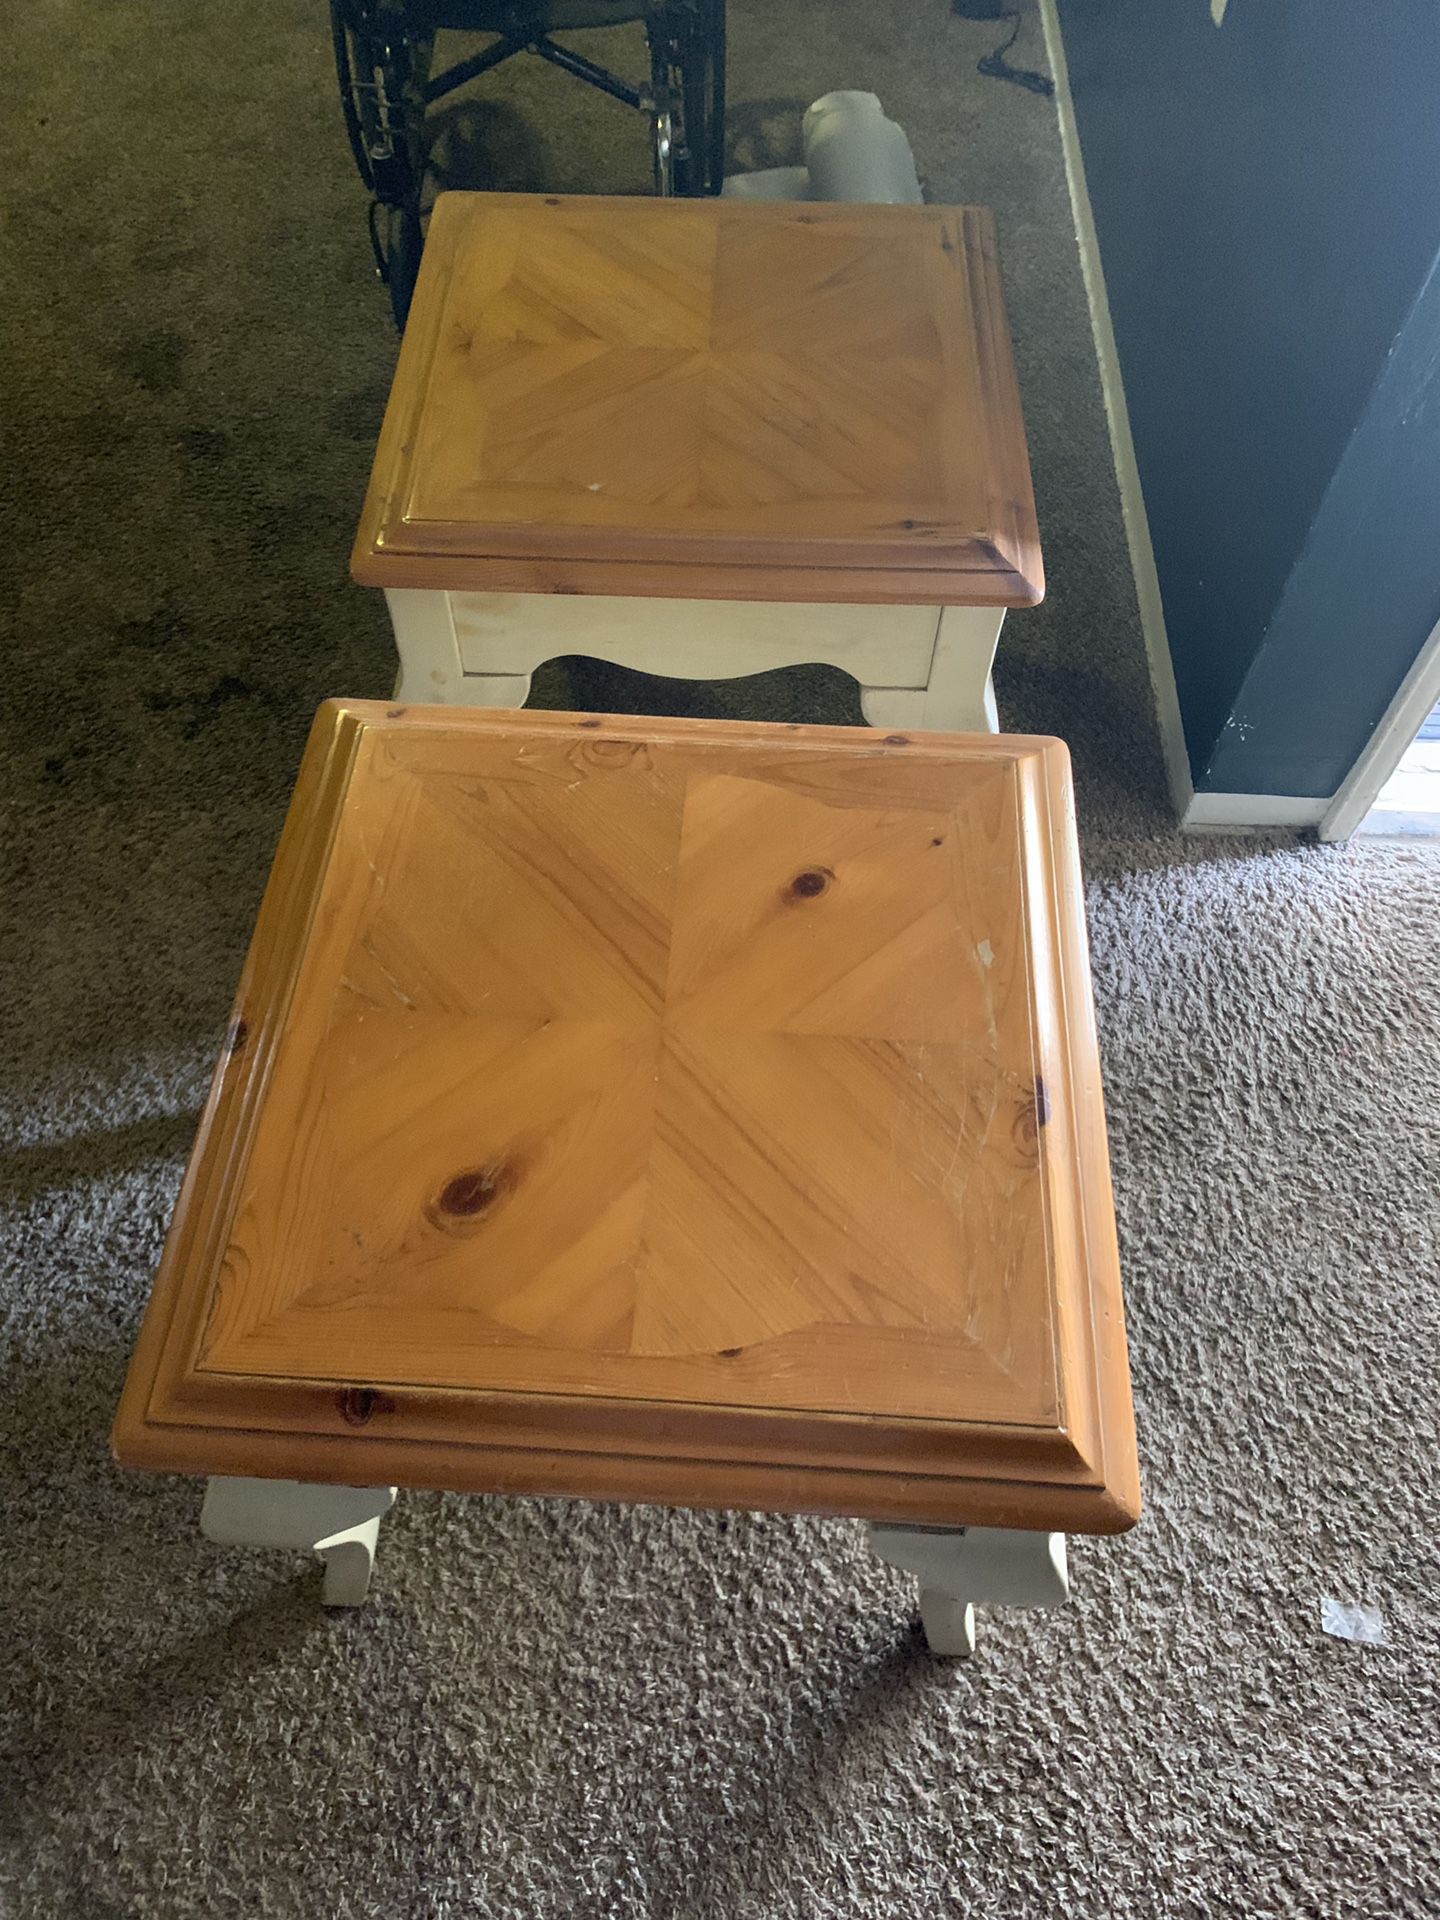 Antique coffee tables